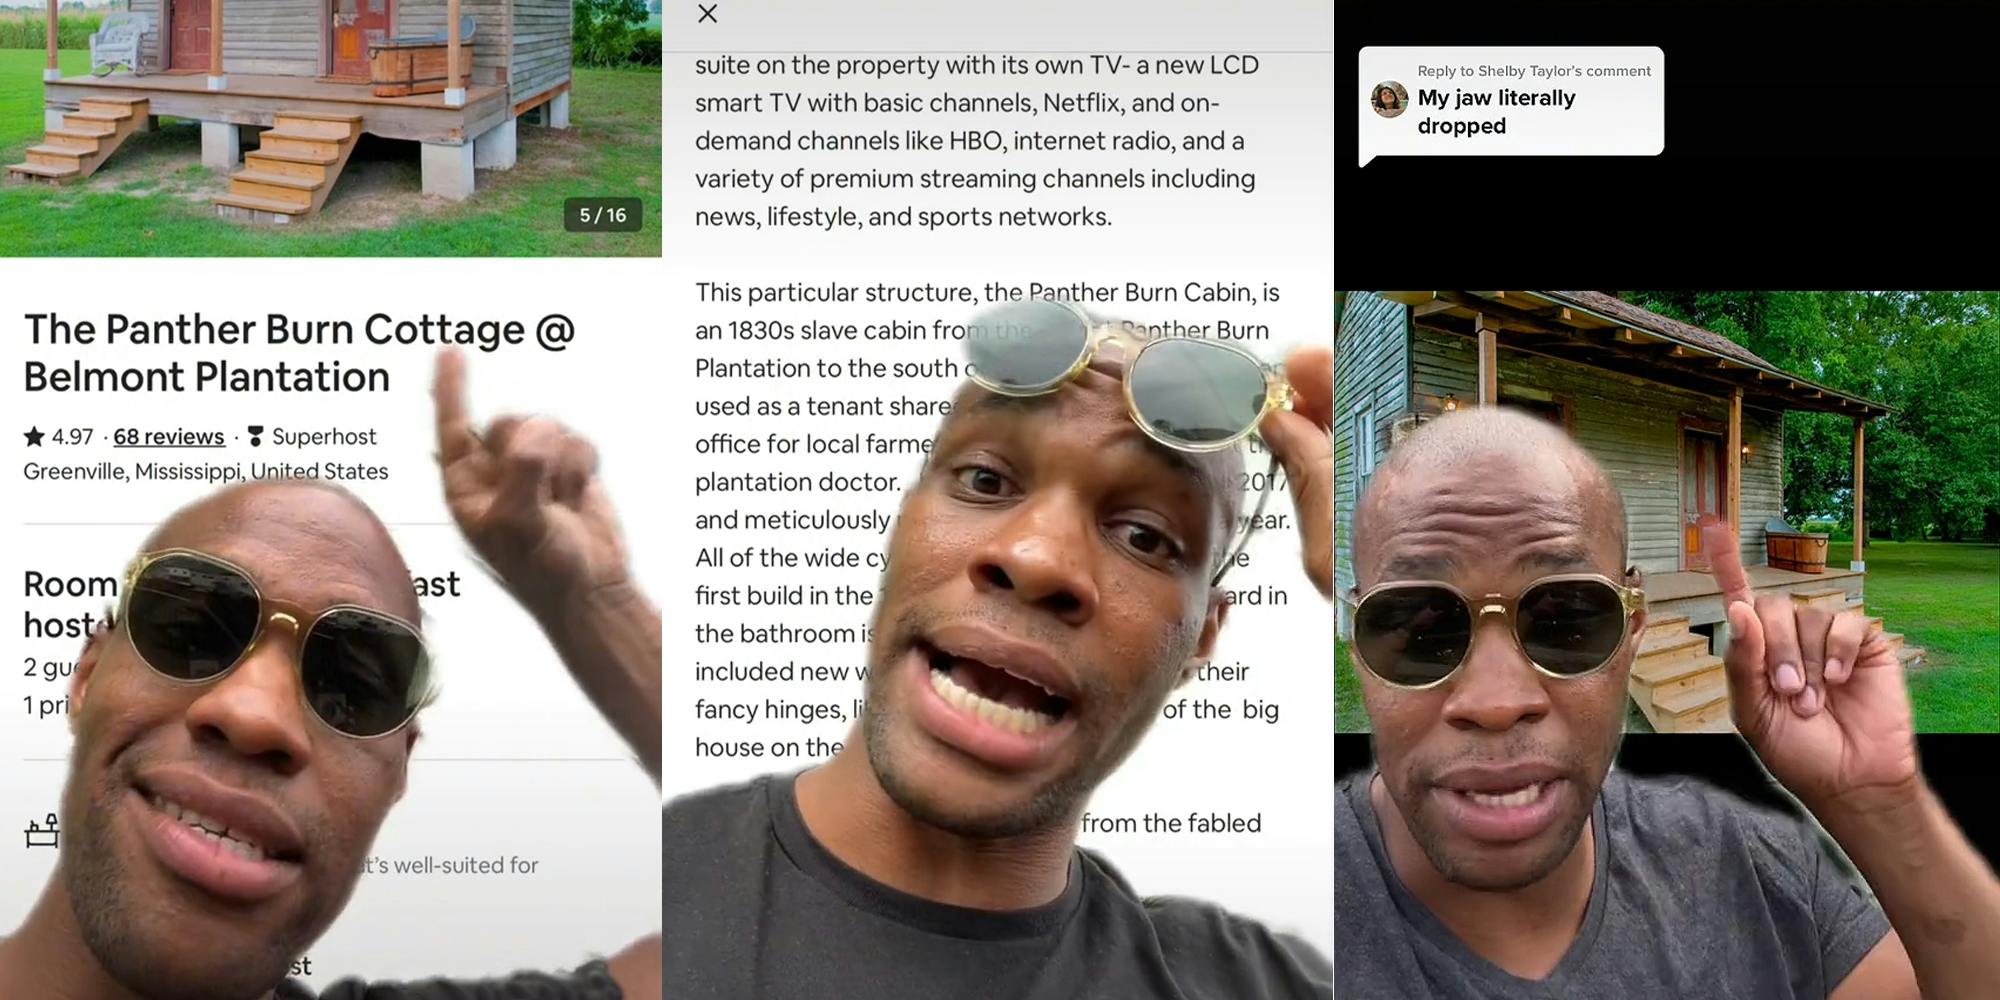 Man greenscreen TikTok over Airbnb listing "The Panther Burn Cottage Belmont Plantation" with photo of building (l) man greenscreen TikTok over historical information about building (c) Man greenscreen TikTok over image of former slave quarters building turned into Airbnb caption "My jaw literally dropped" (r)